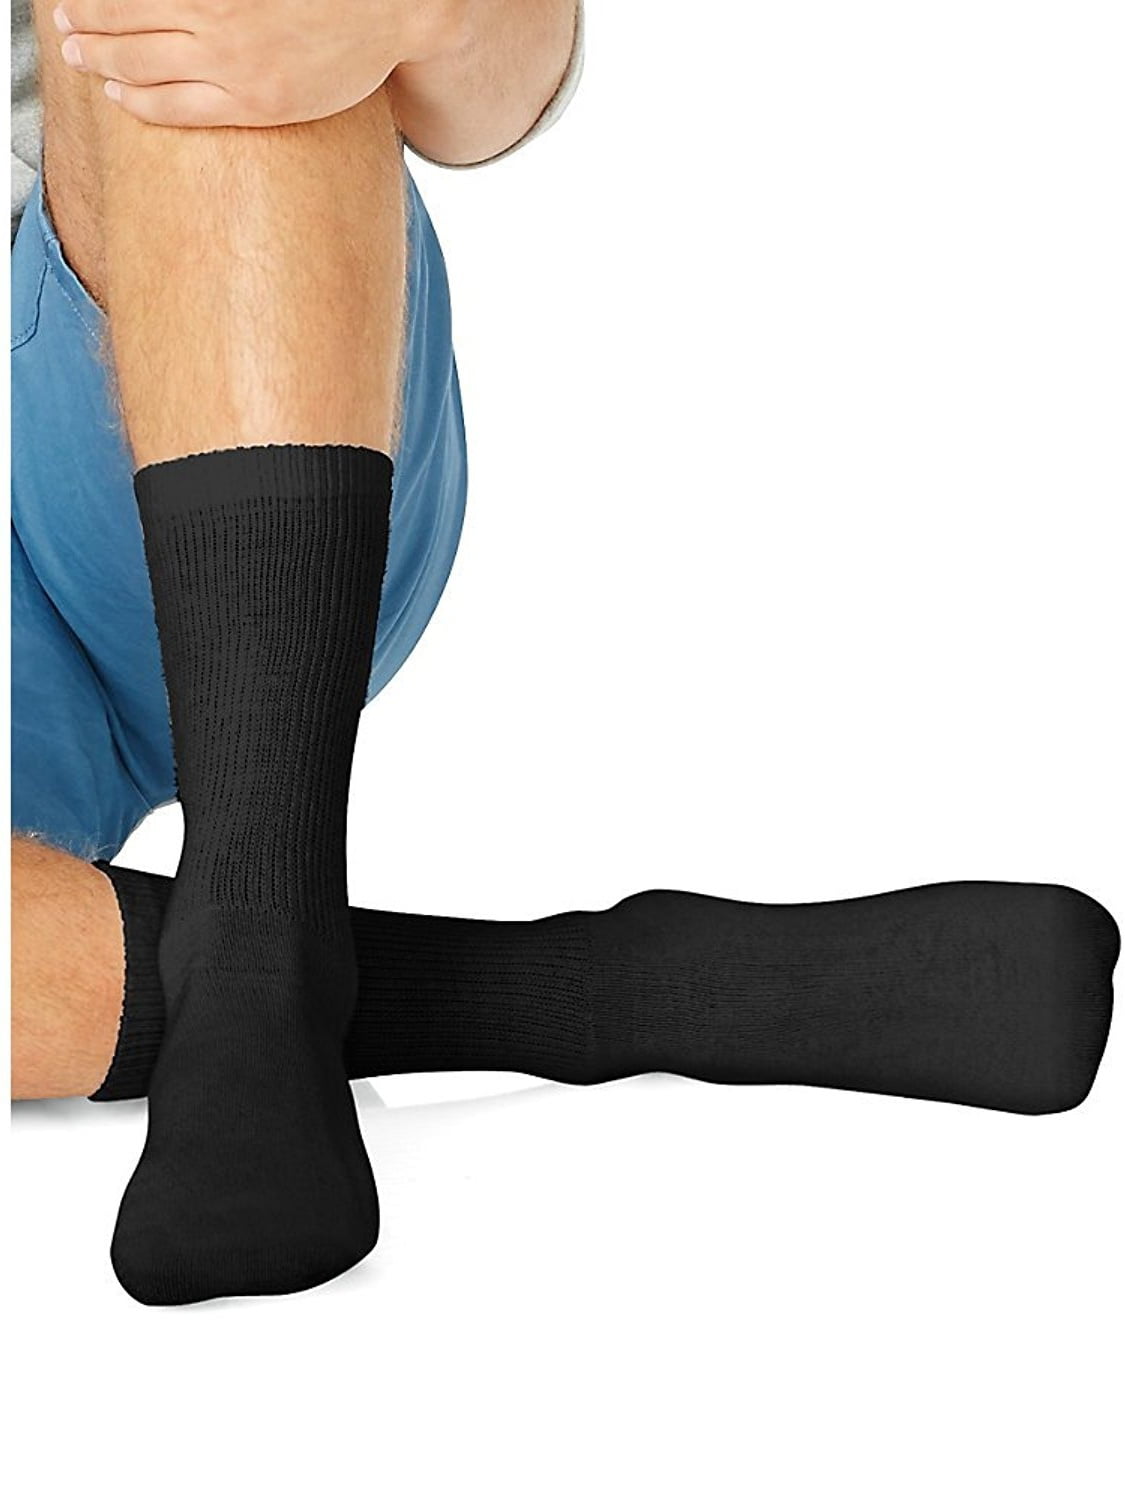 NEW Hanz Submerge Waterproof Socks Small Sock Black Breathable Thermal Level H2 